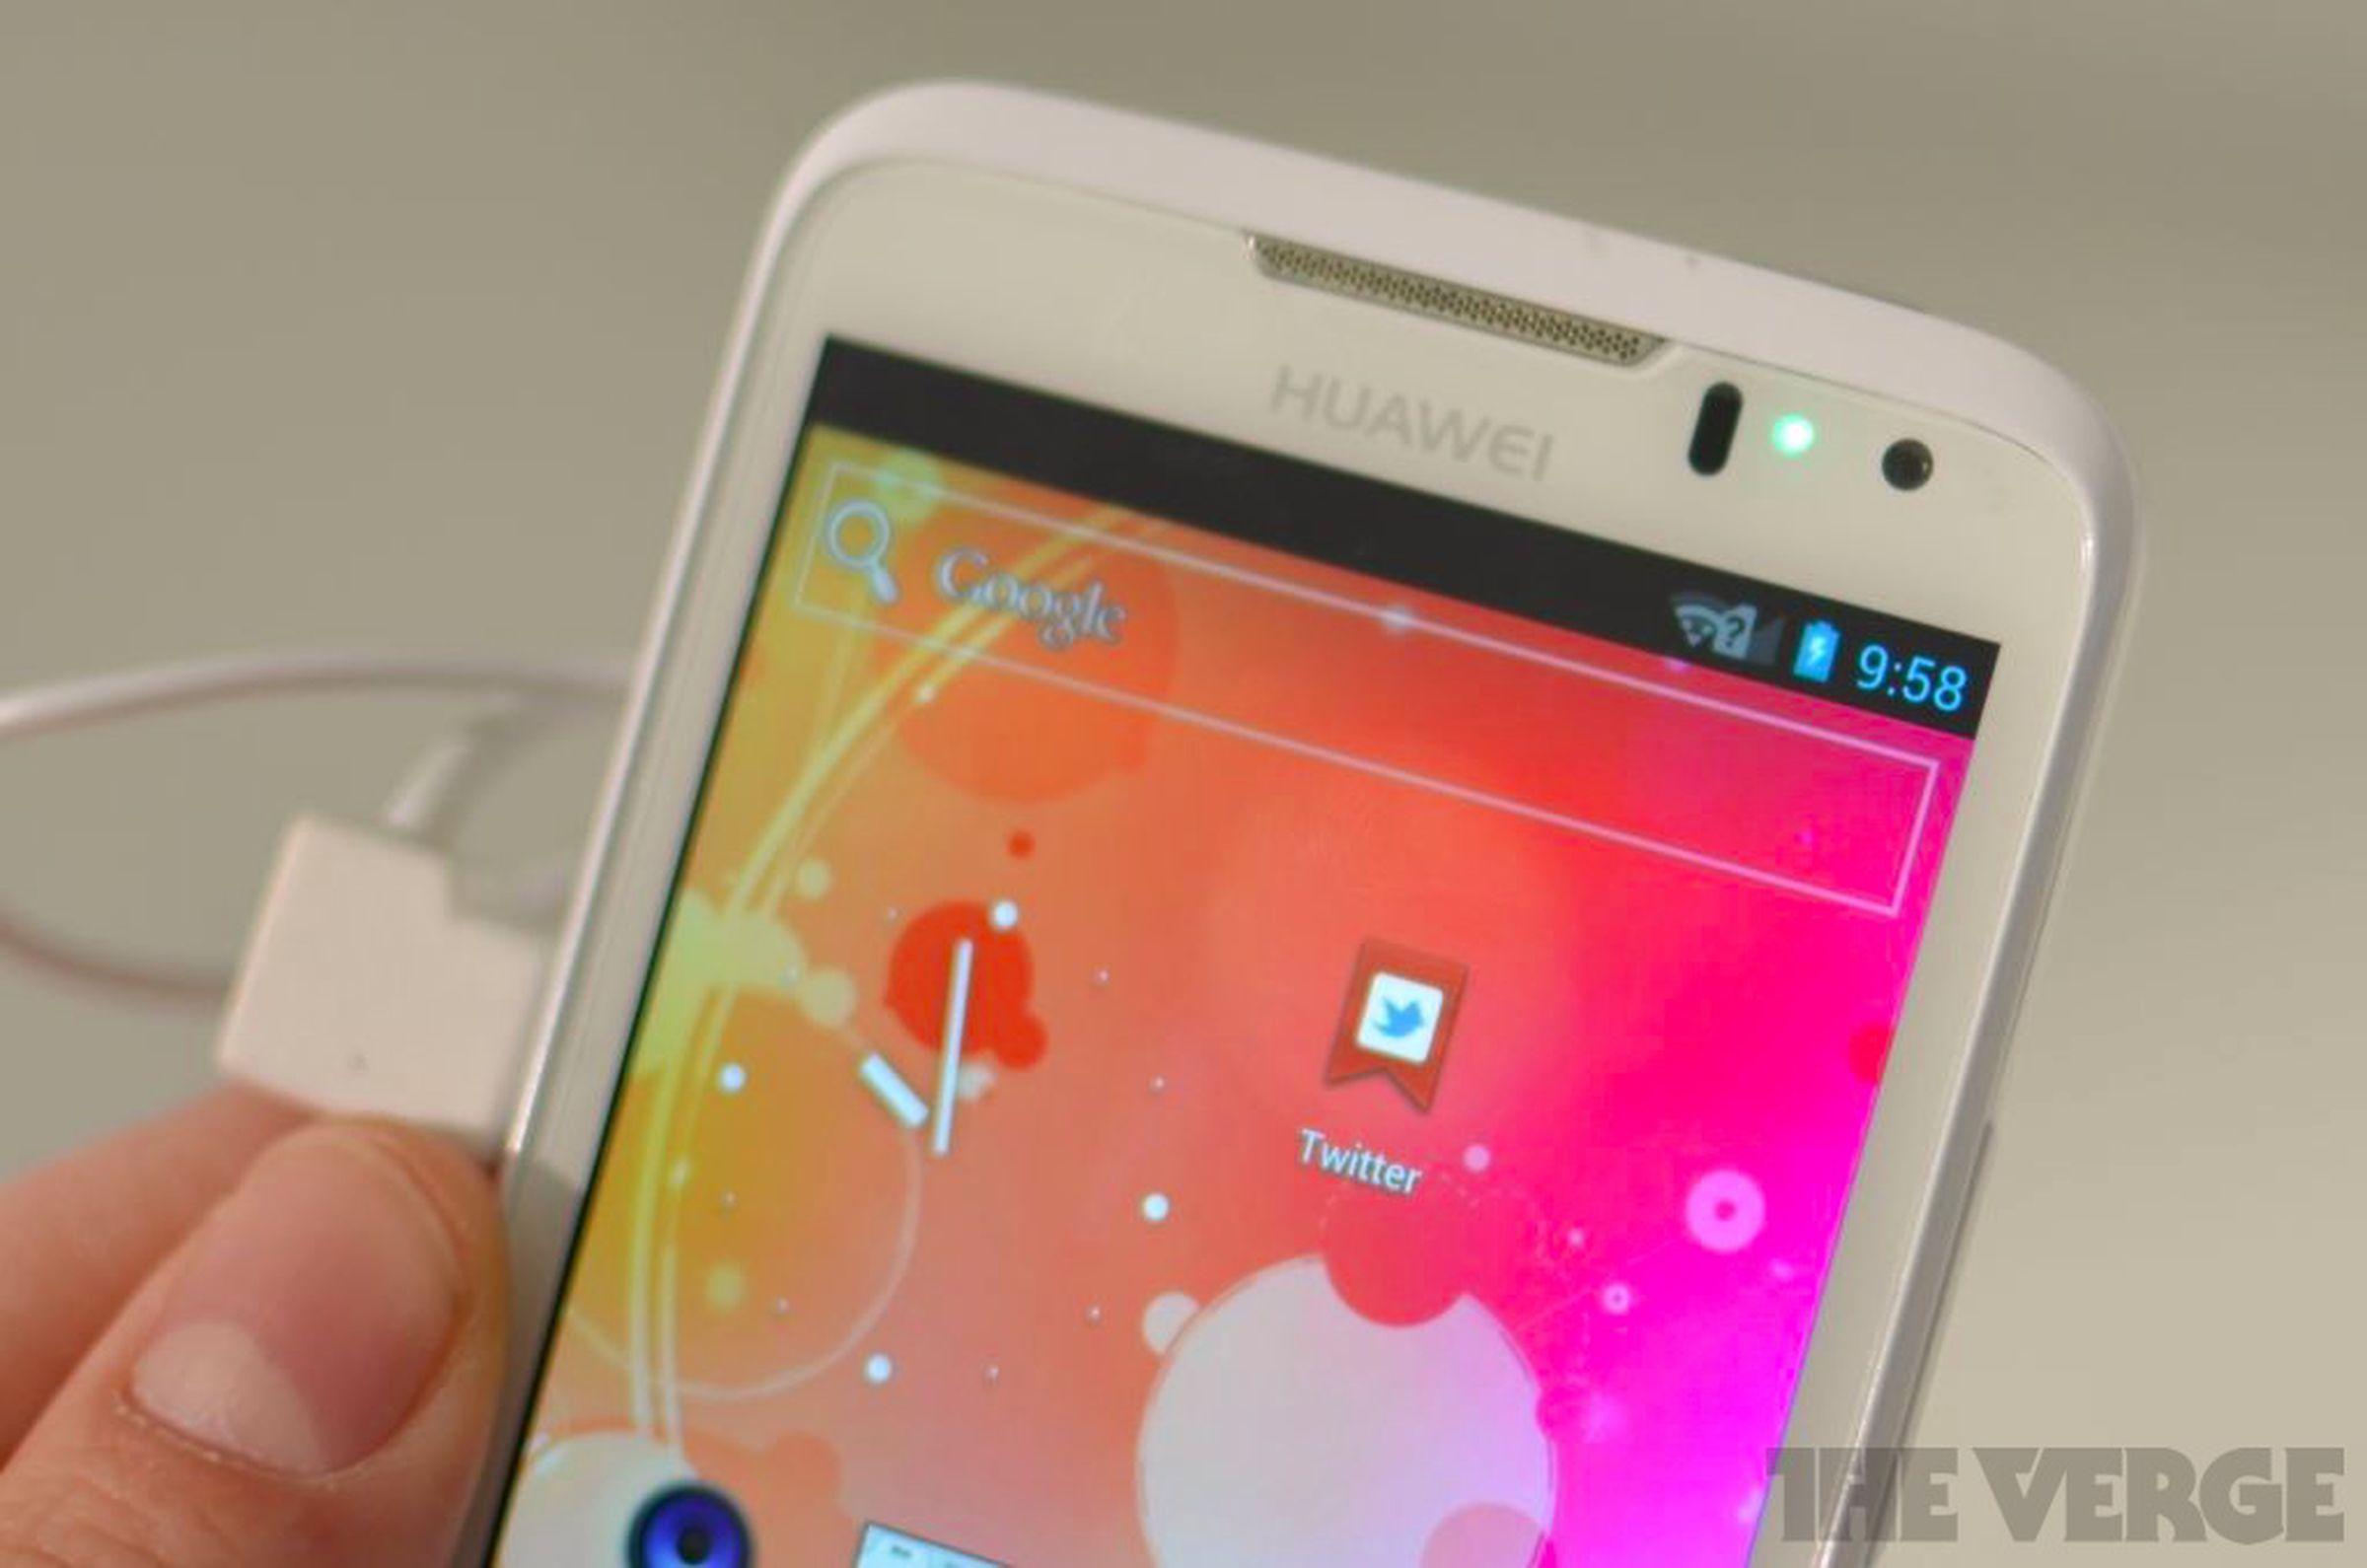 Huawei Ascend D LTE hands-on pictures